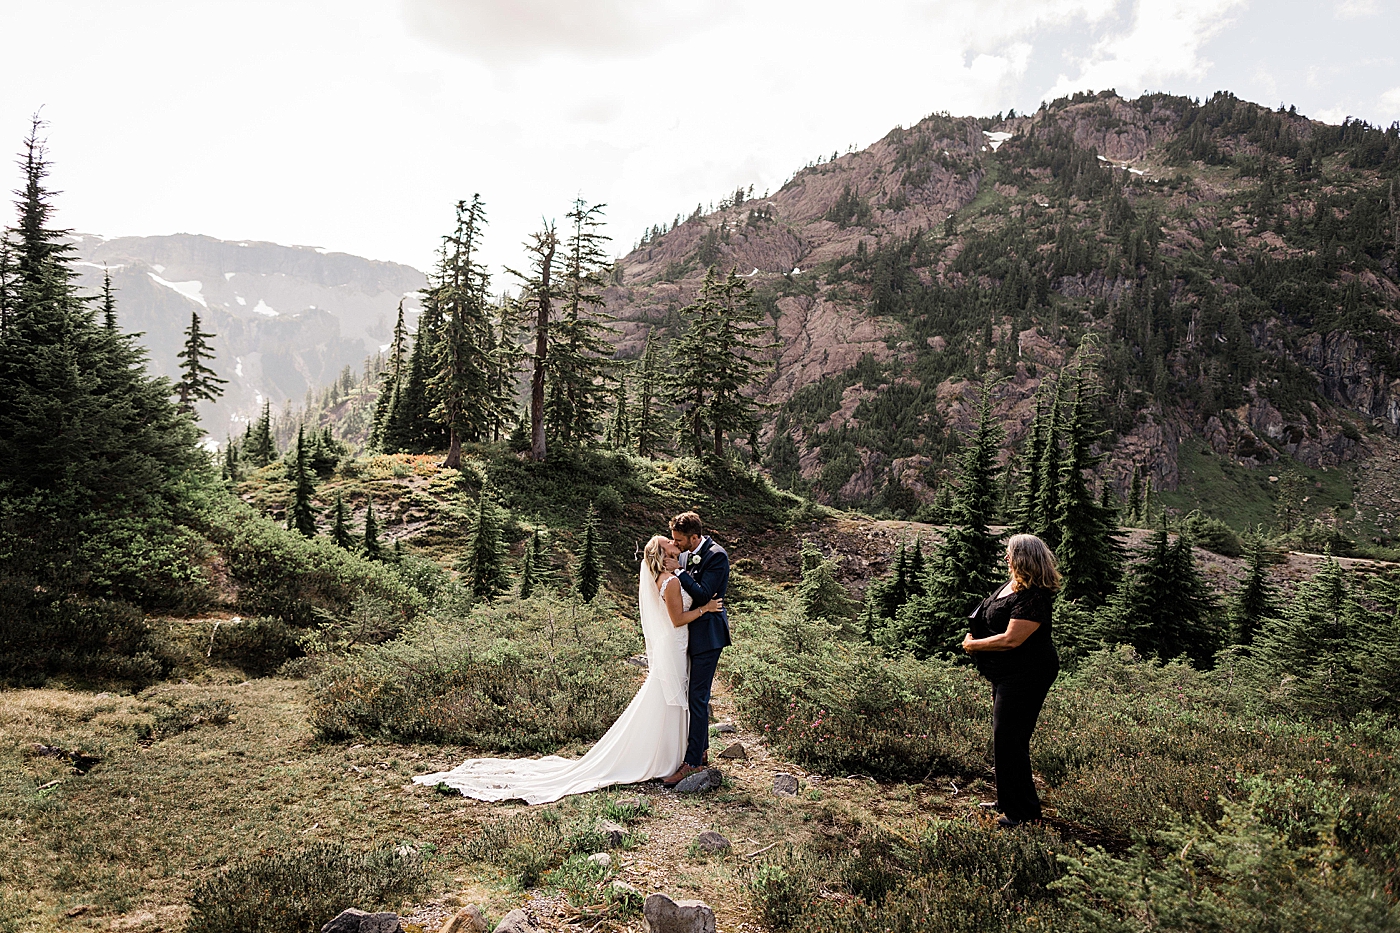 Bride and grooms first kiss | Photo by Megan Montalvo Photography.